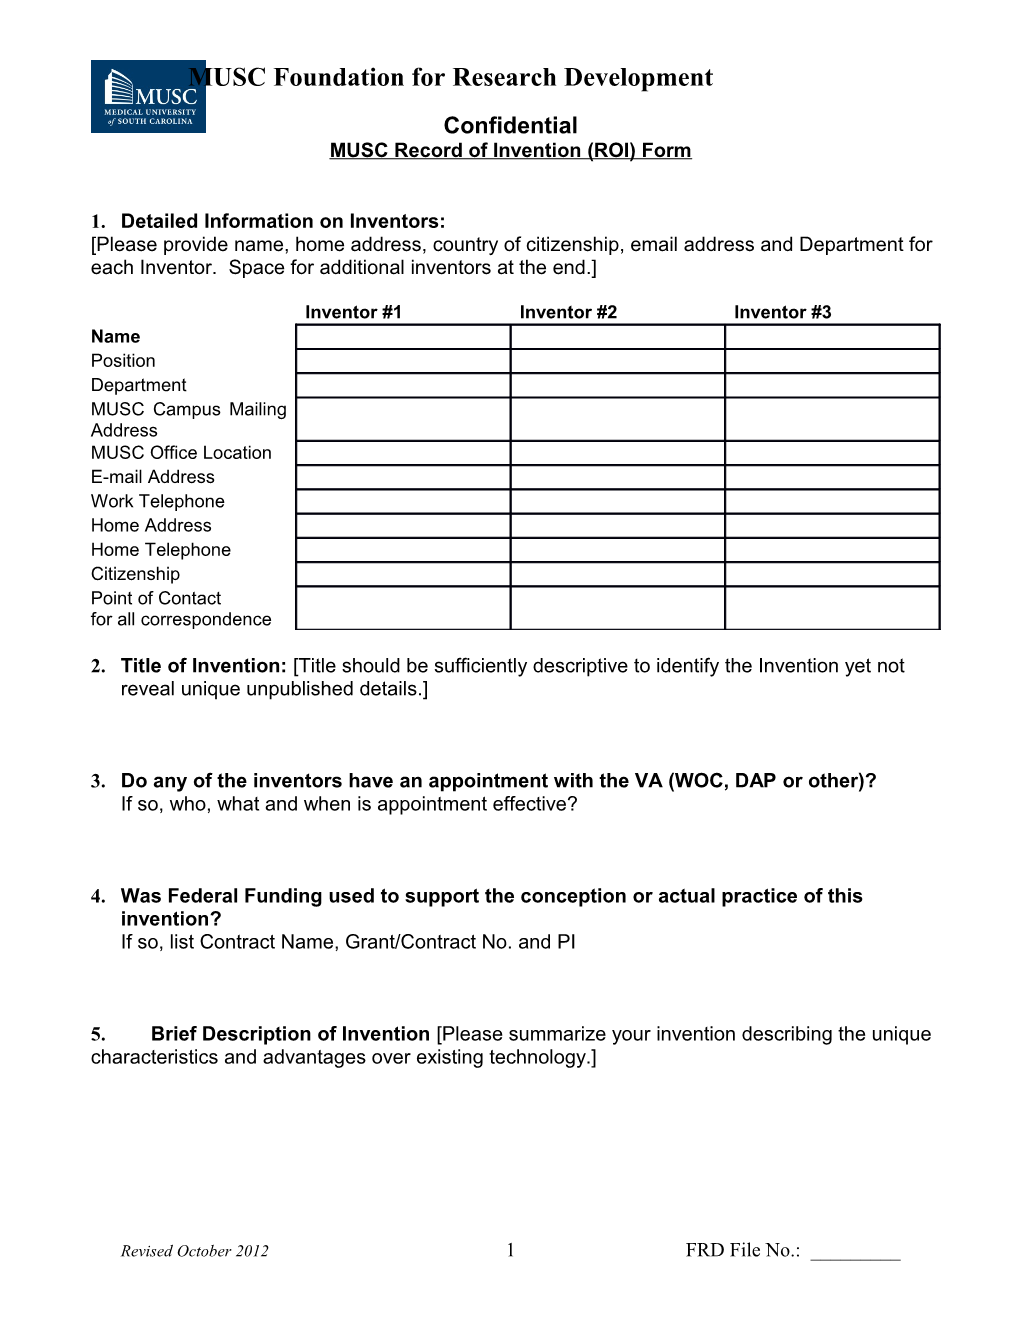 MUSC Record of Invention (ROI) Form